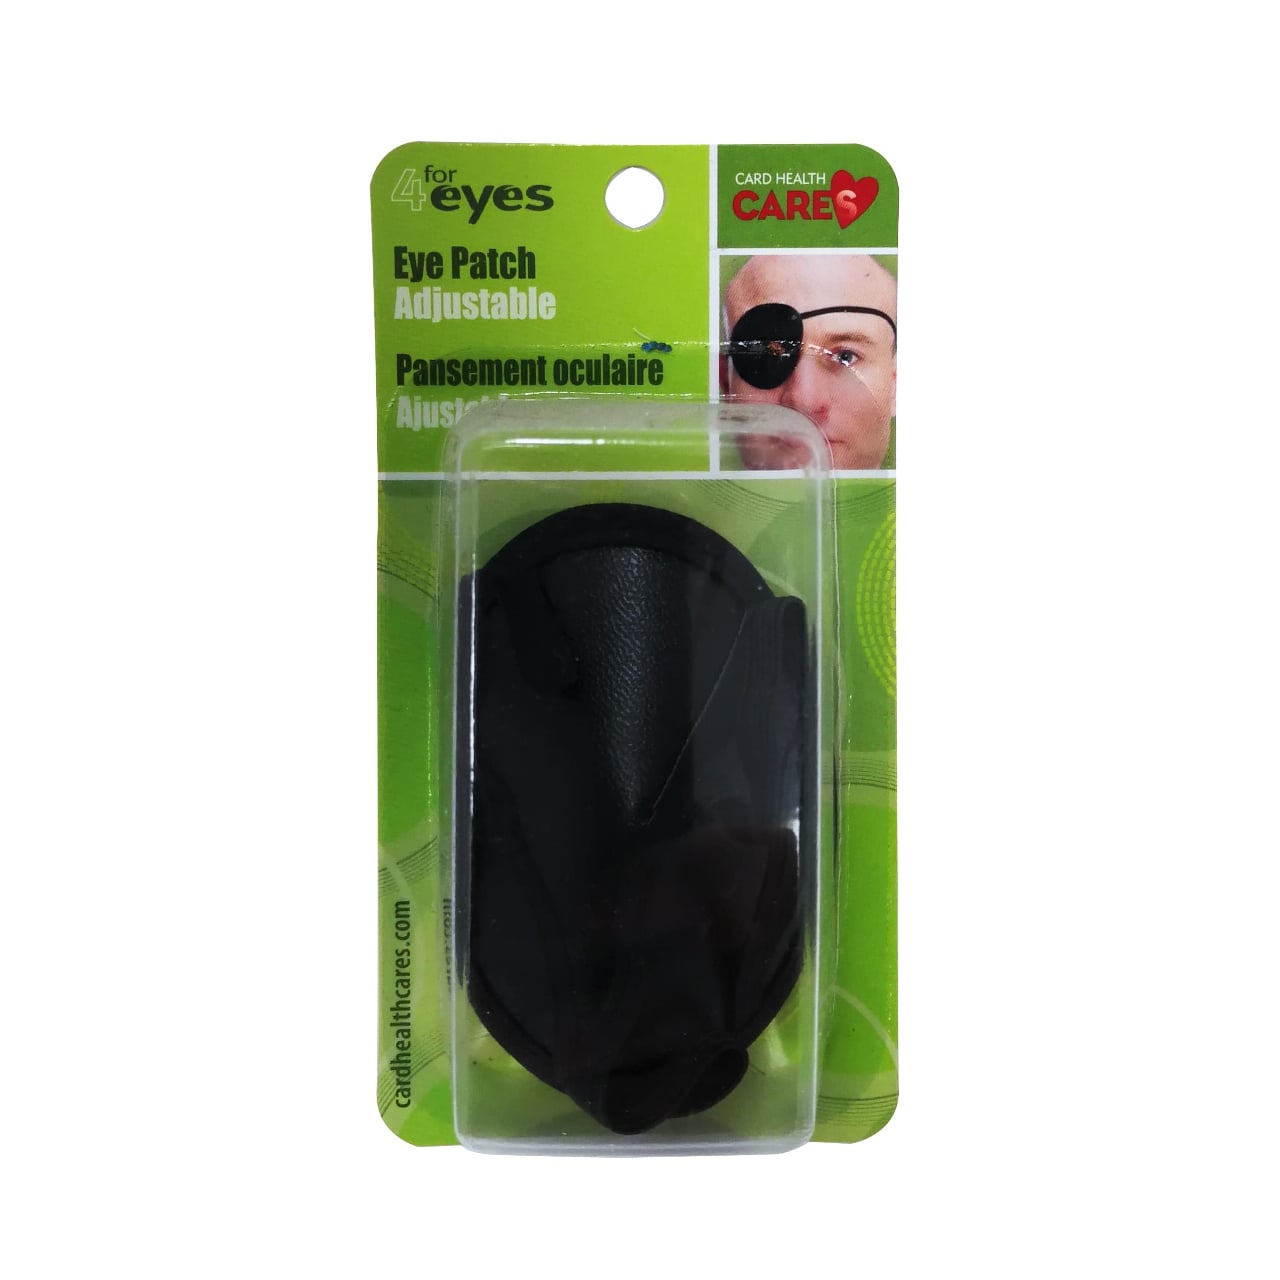 Black eye patch with clear plastic packaging for 4Eyes Adjustable Eye Patch.